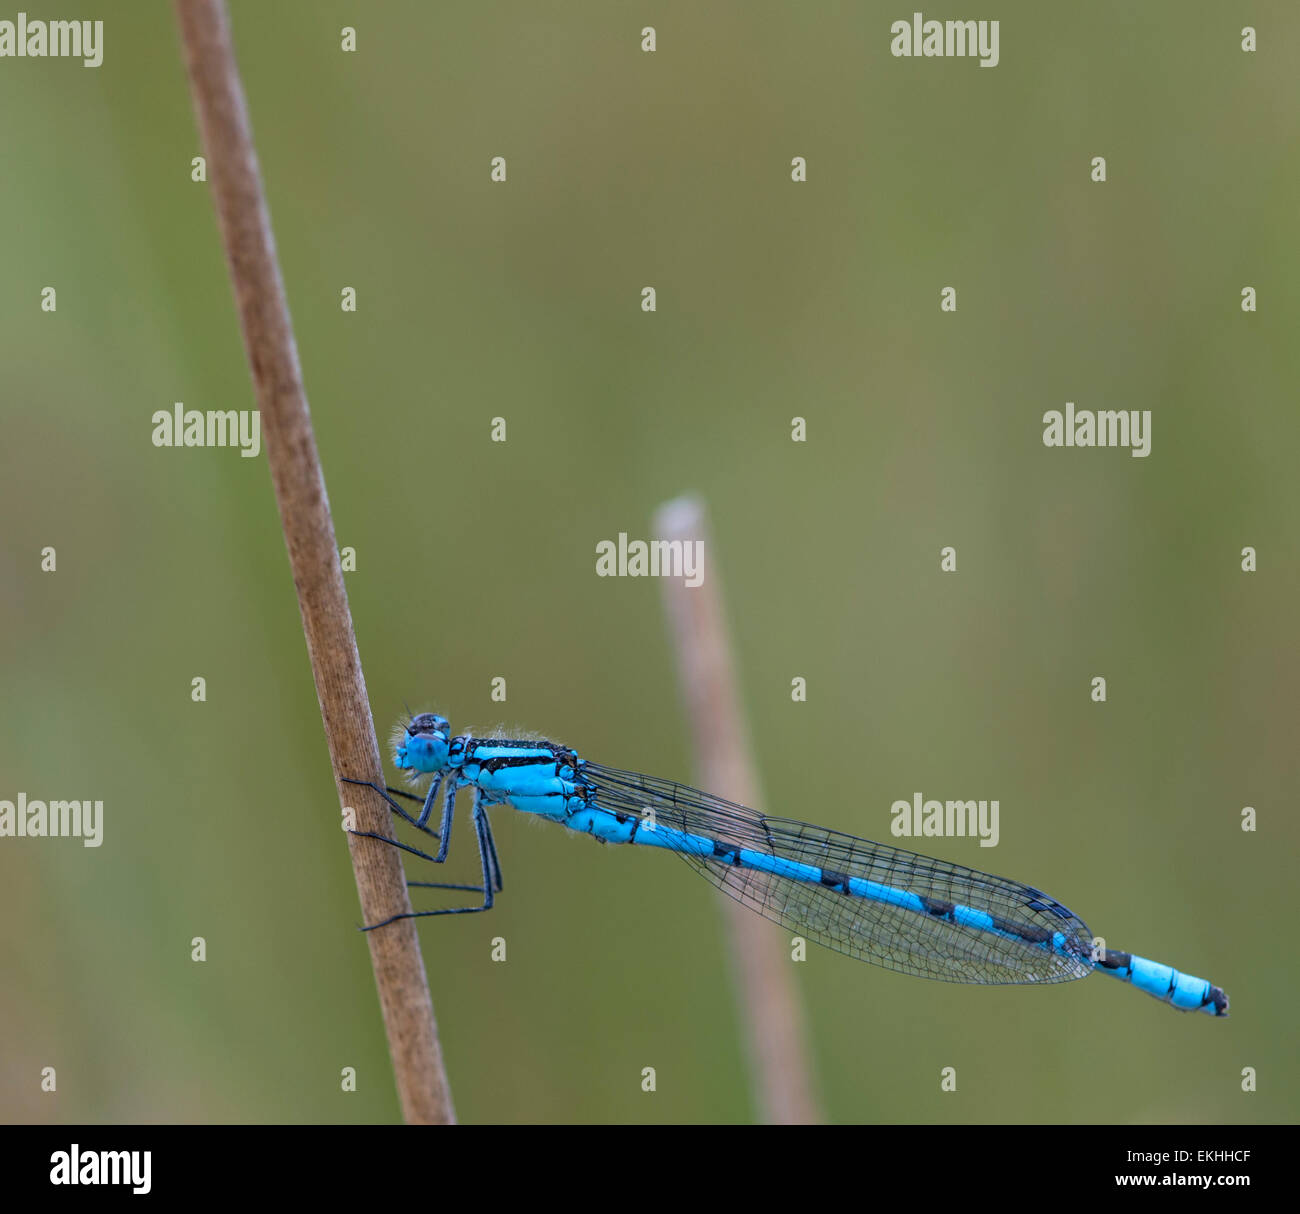 A blue Damselfly clinging to a grass stalk in a meadow, in Cumbria, England. The insect is shot in a profile position. Stock Photo